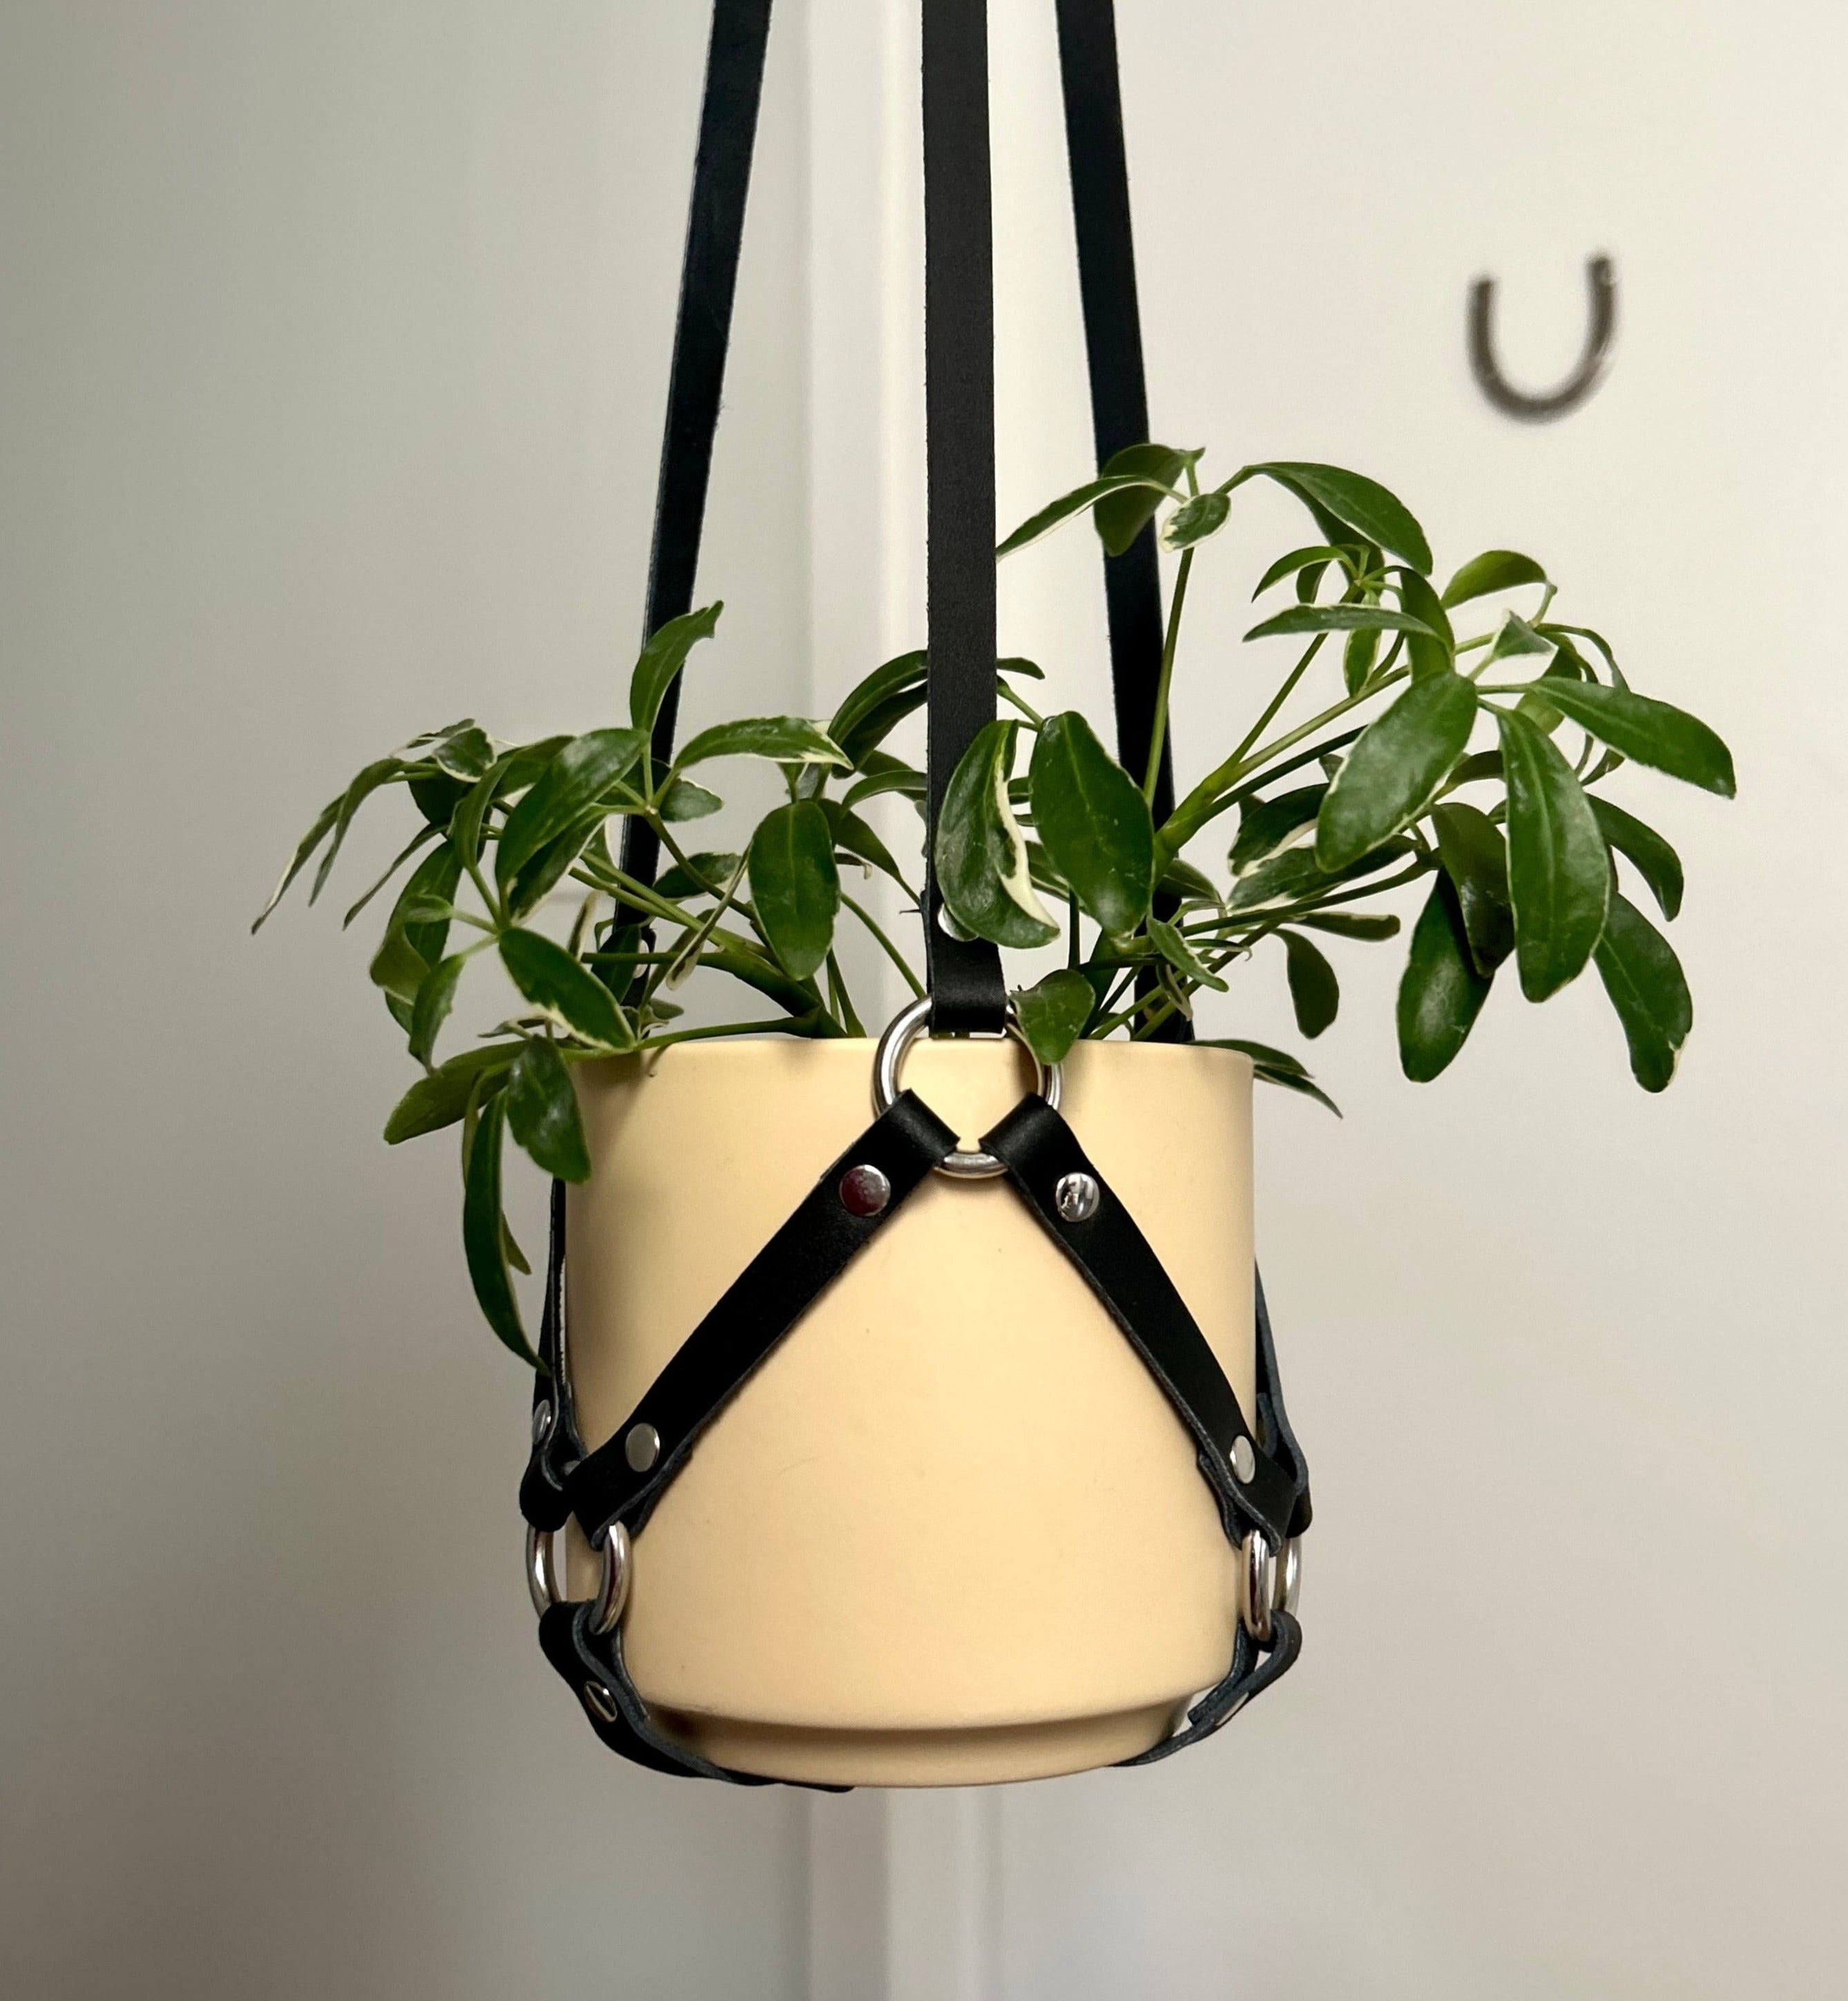 6" leather plant hanger holding a small umbrella plant 